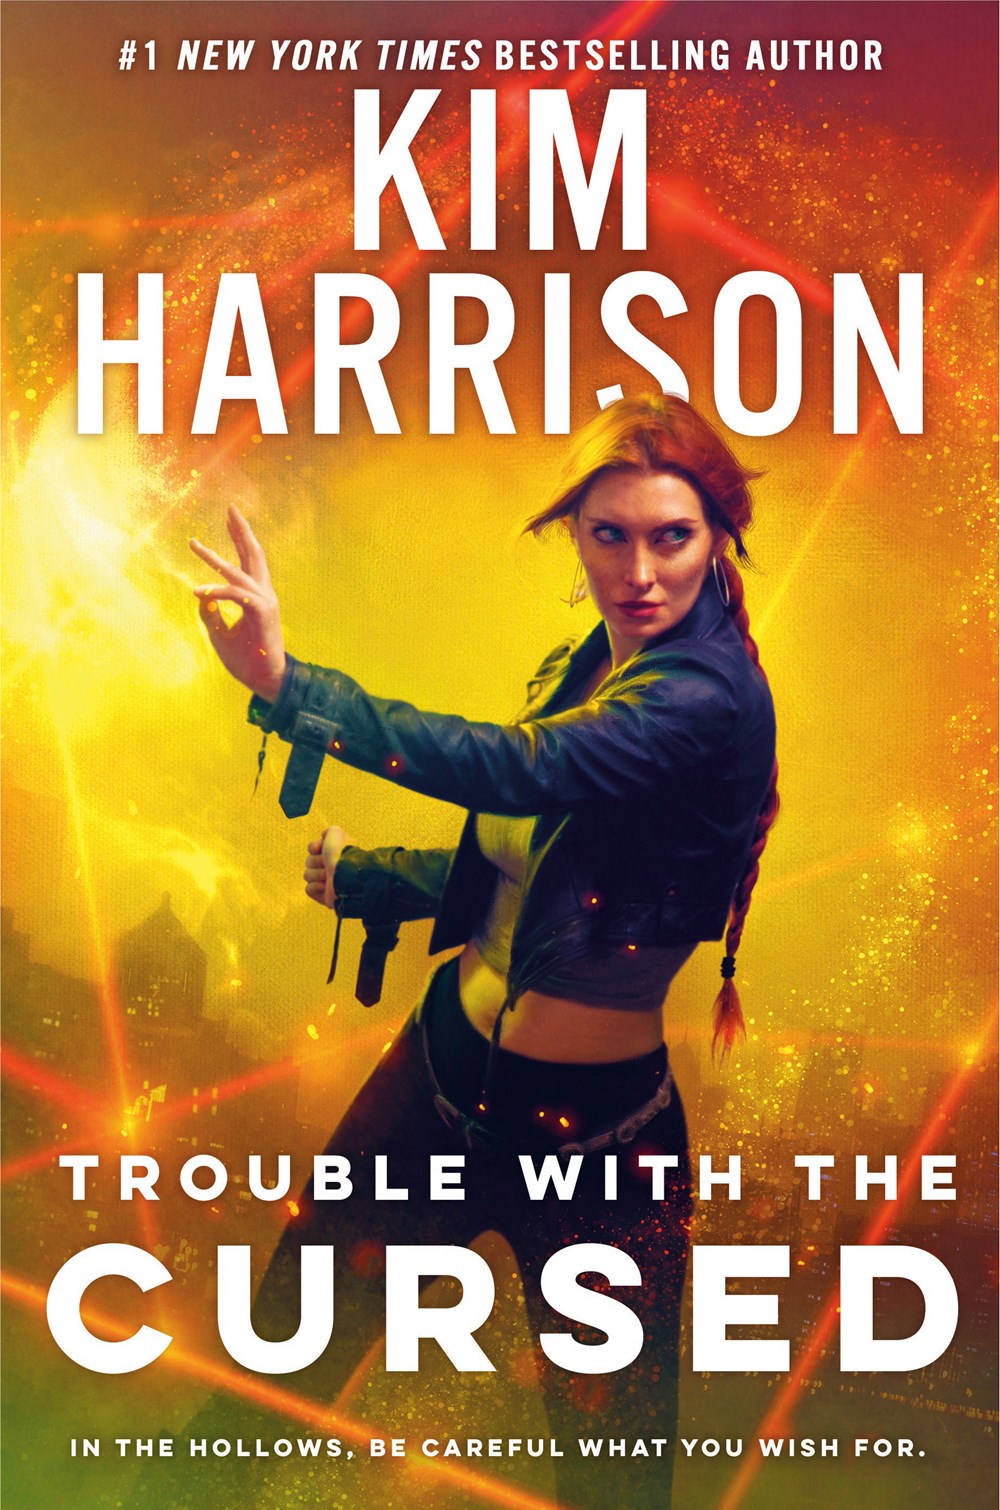 Trouble with the Cursed by Kim Harrison